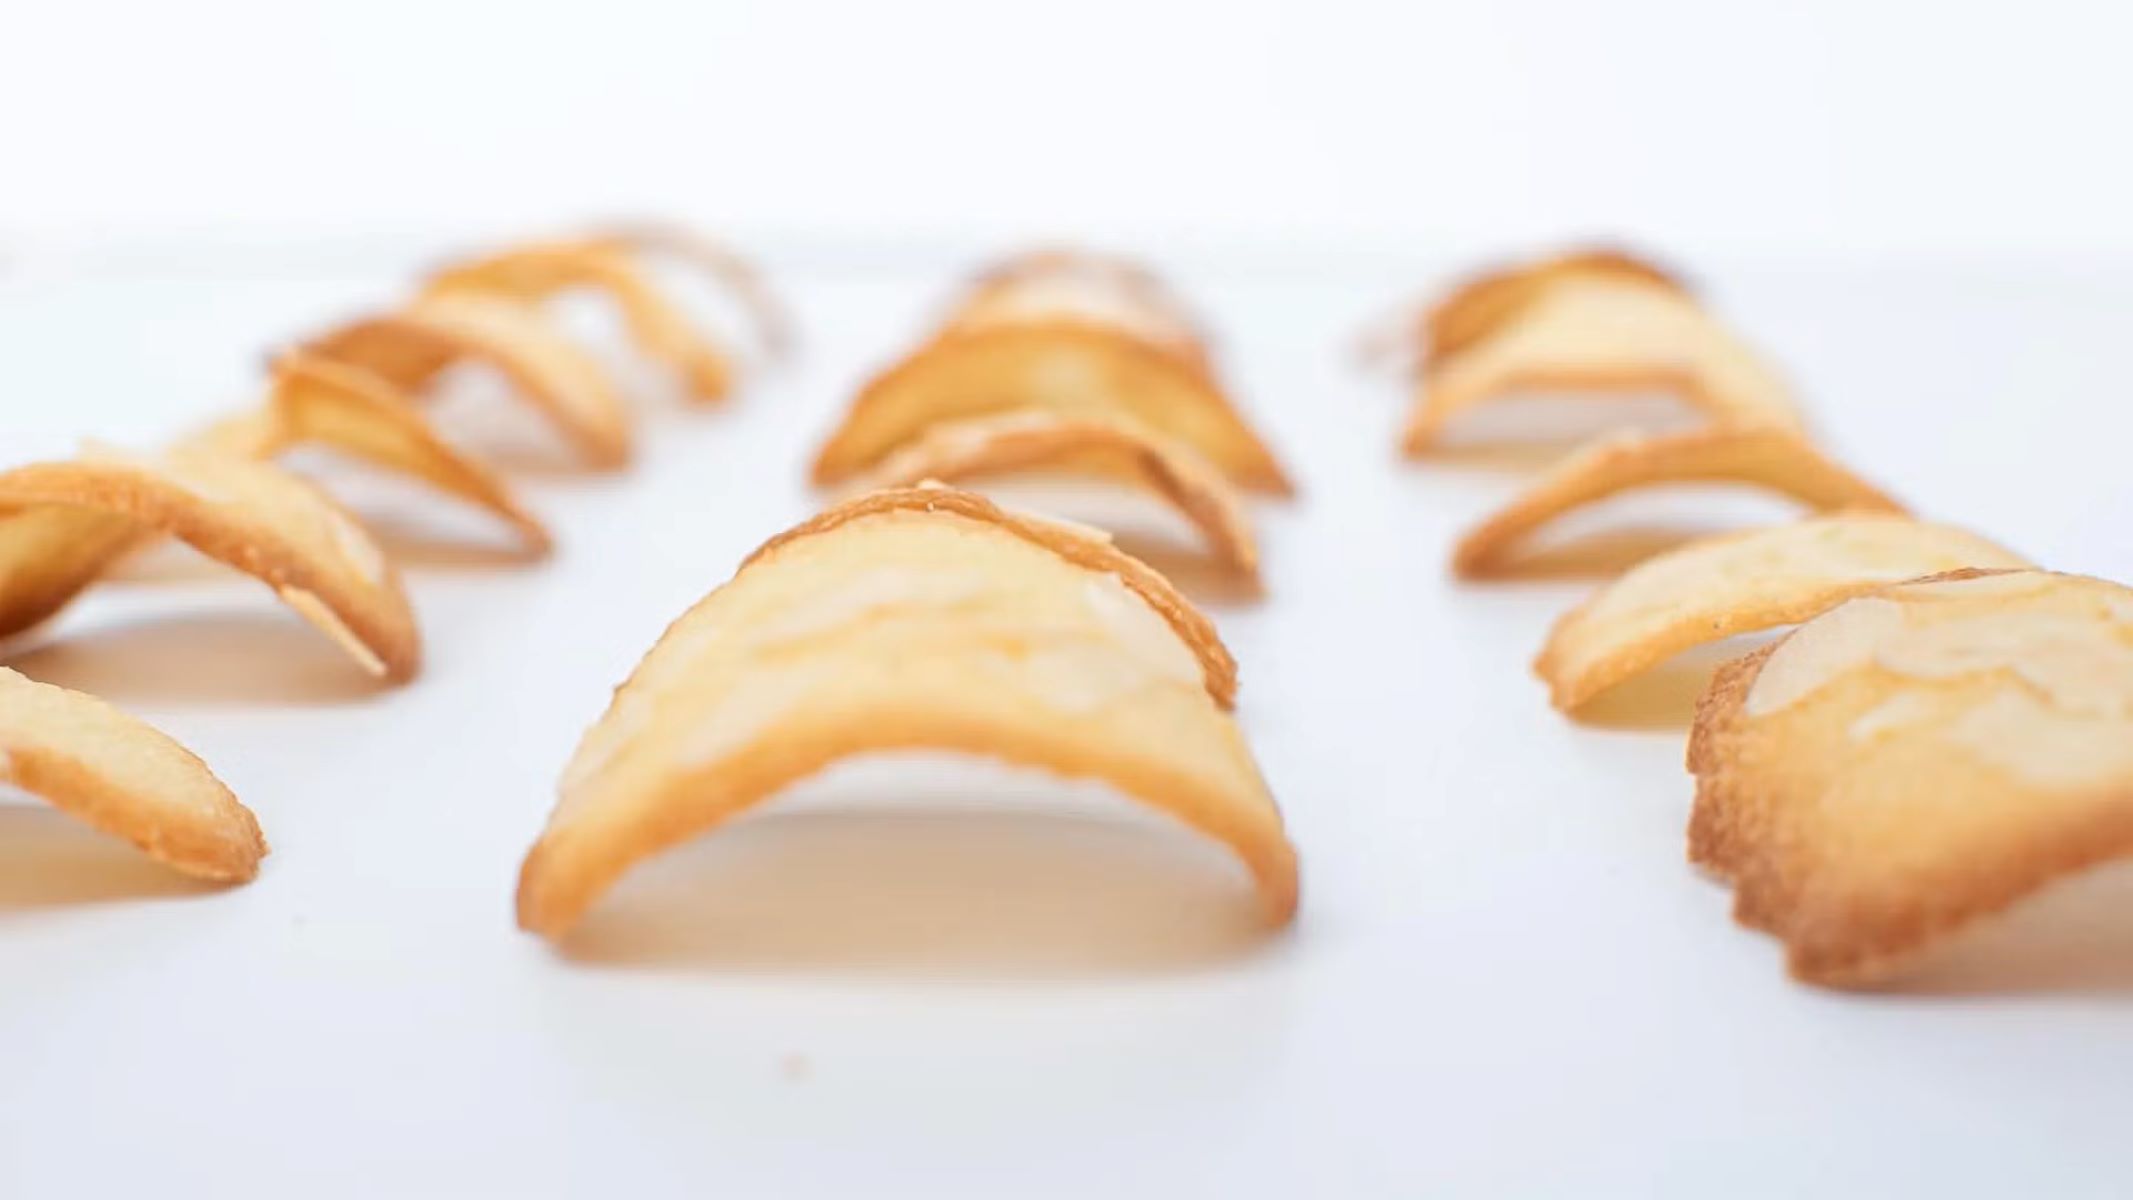 French Almond Orange Tuiles - A Delicious And Easy Dessert For French Fridays